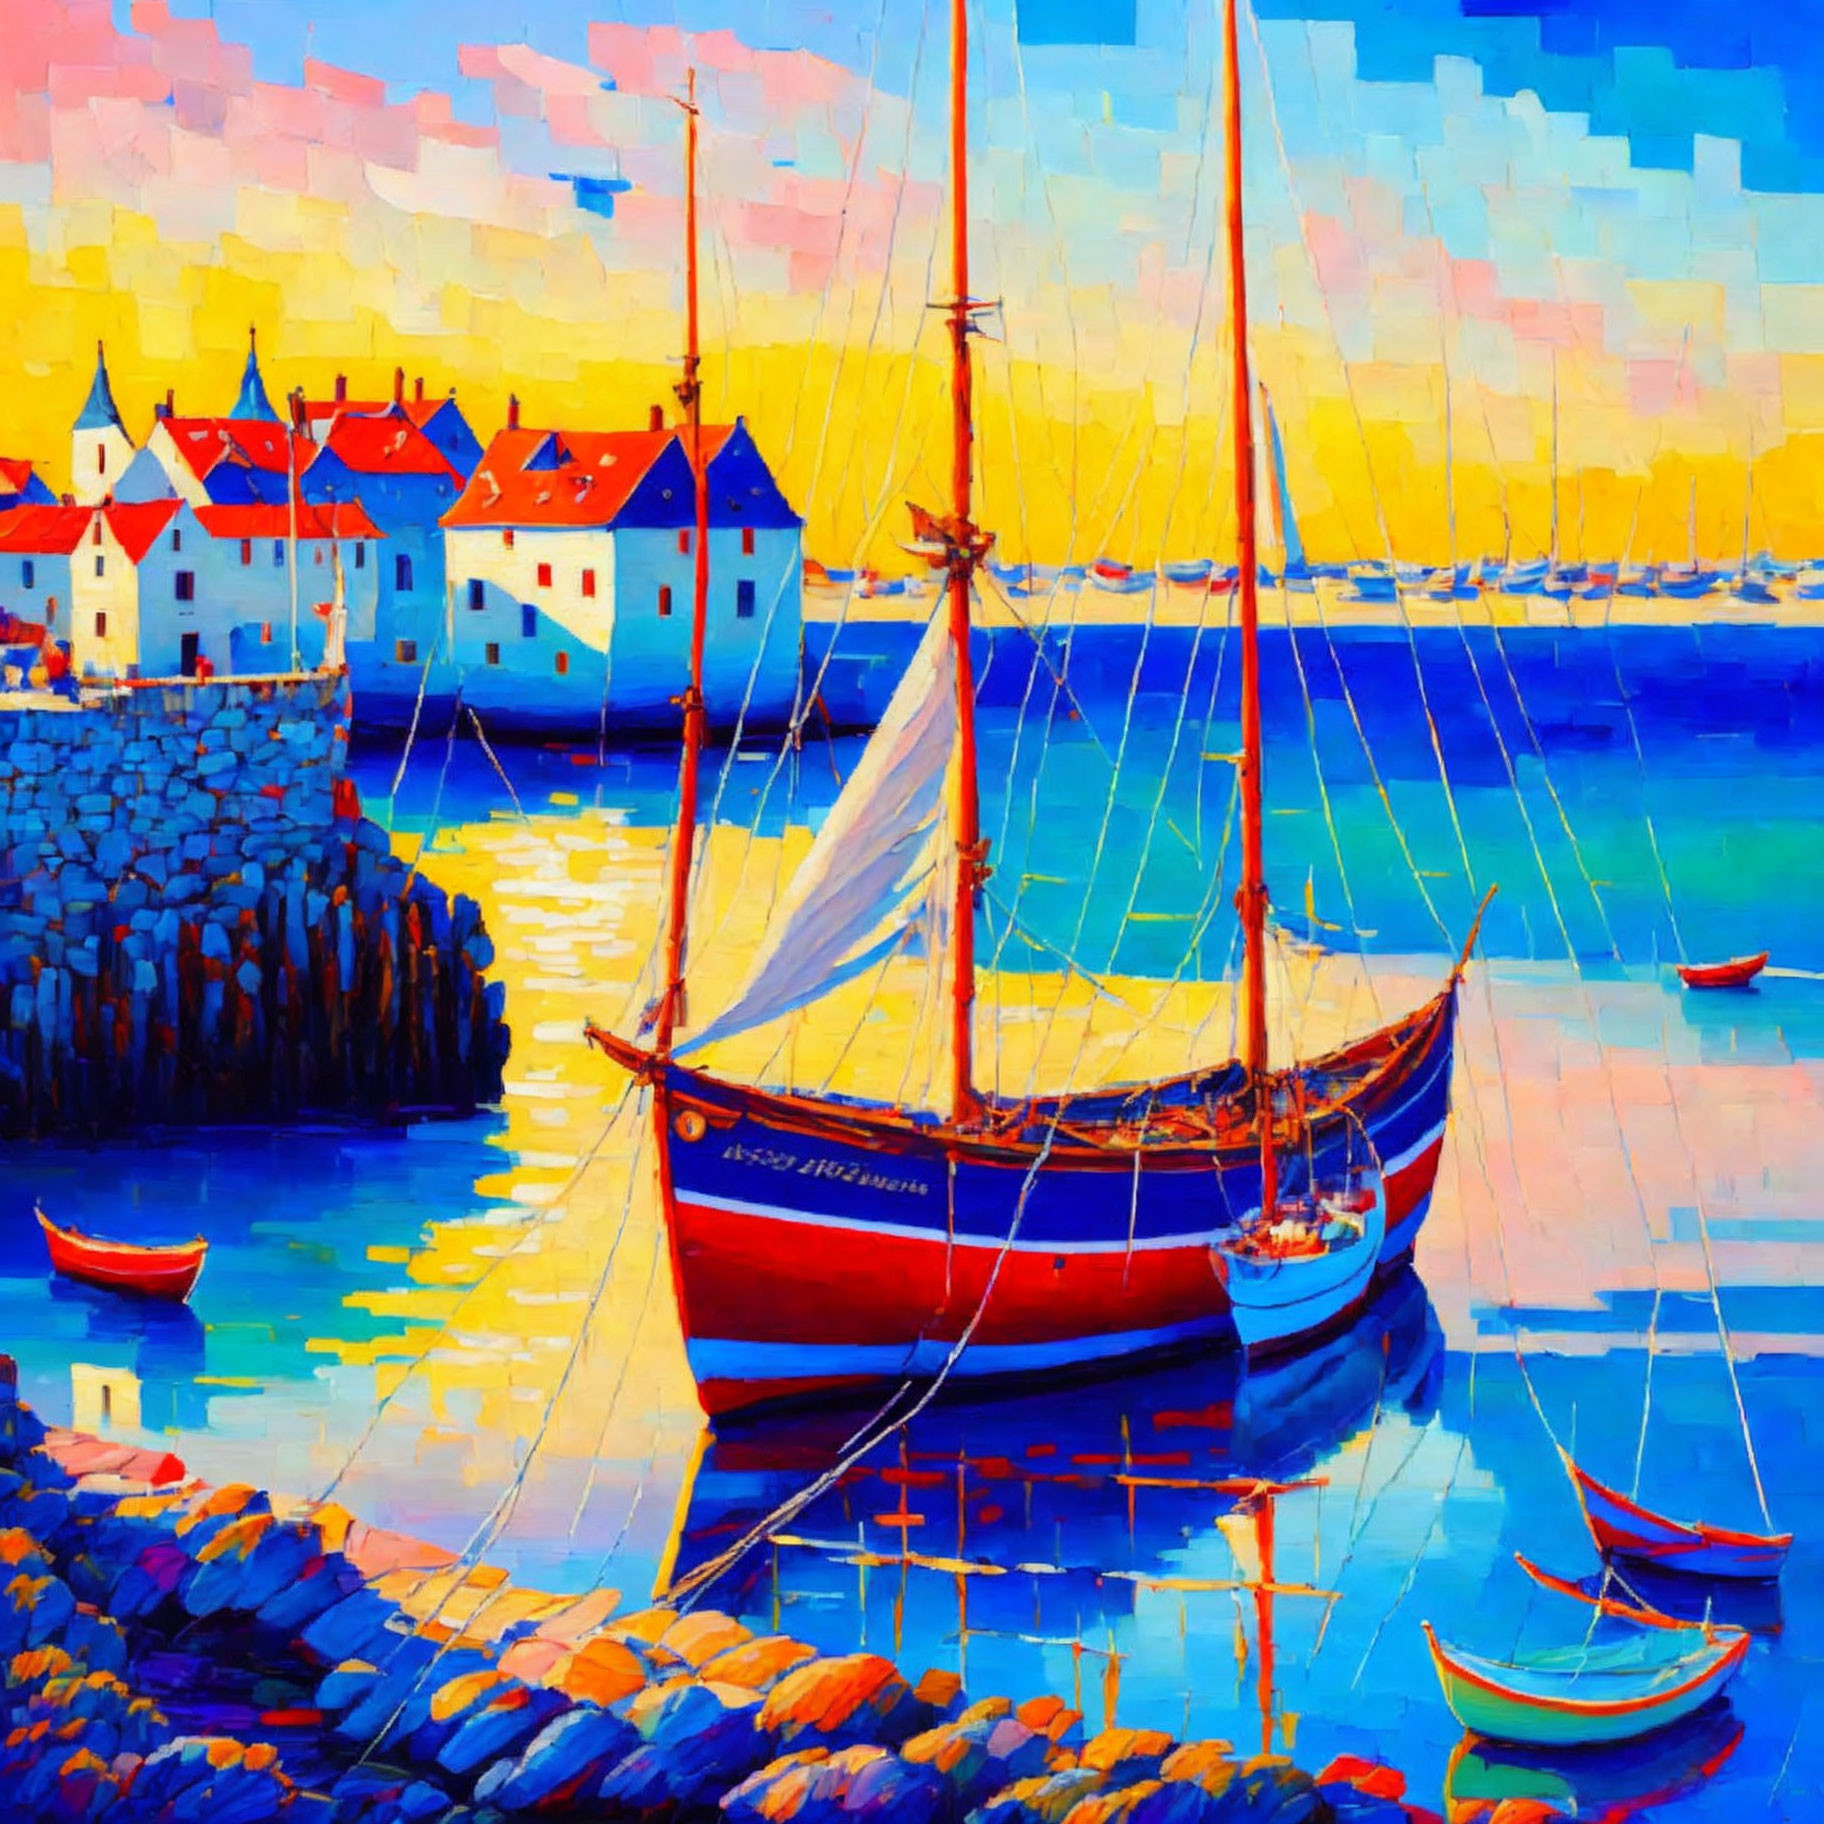 Colorful painting of red boat in harbor with white houses, stone pier, and sunset sky.